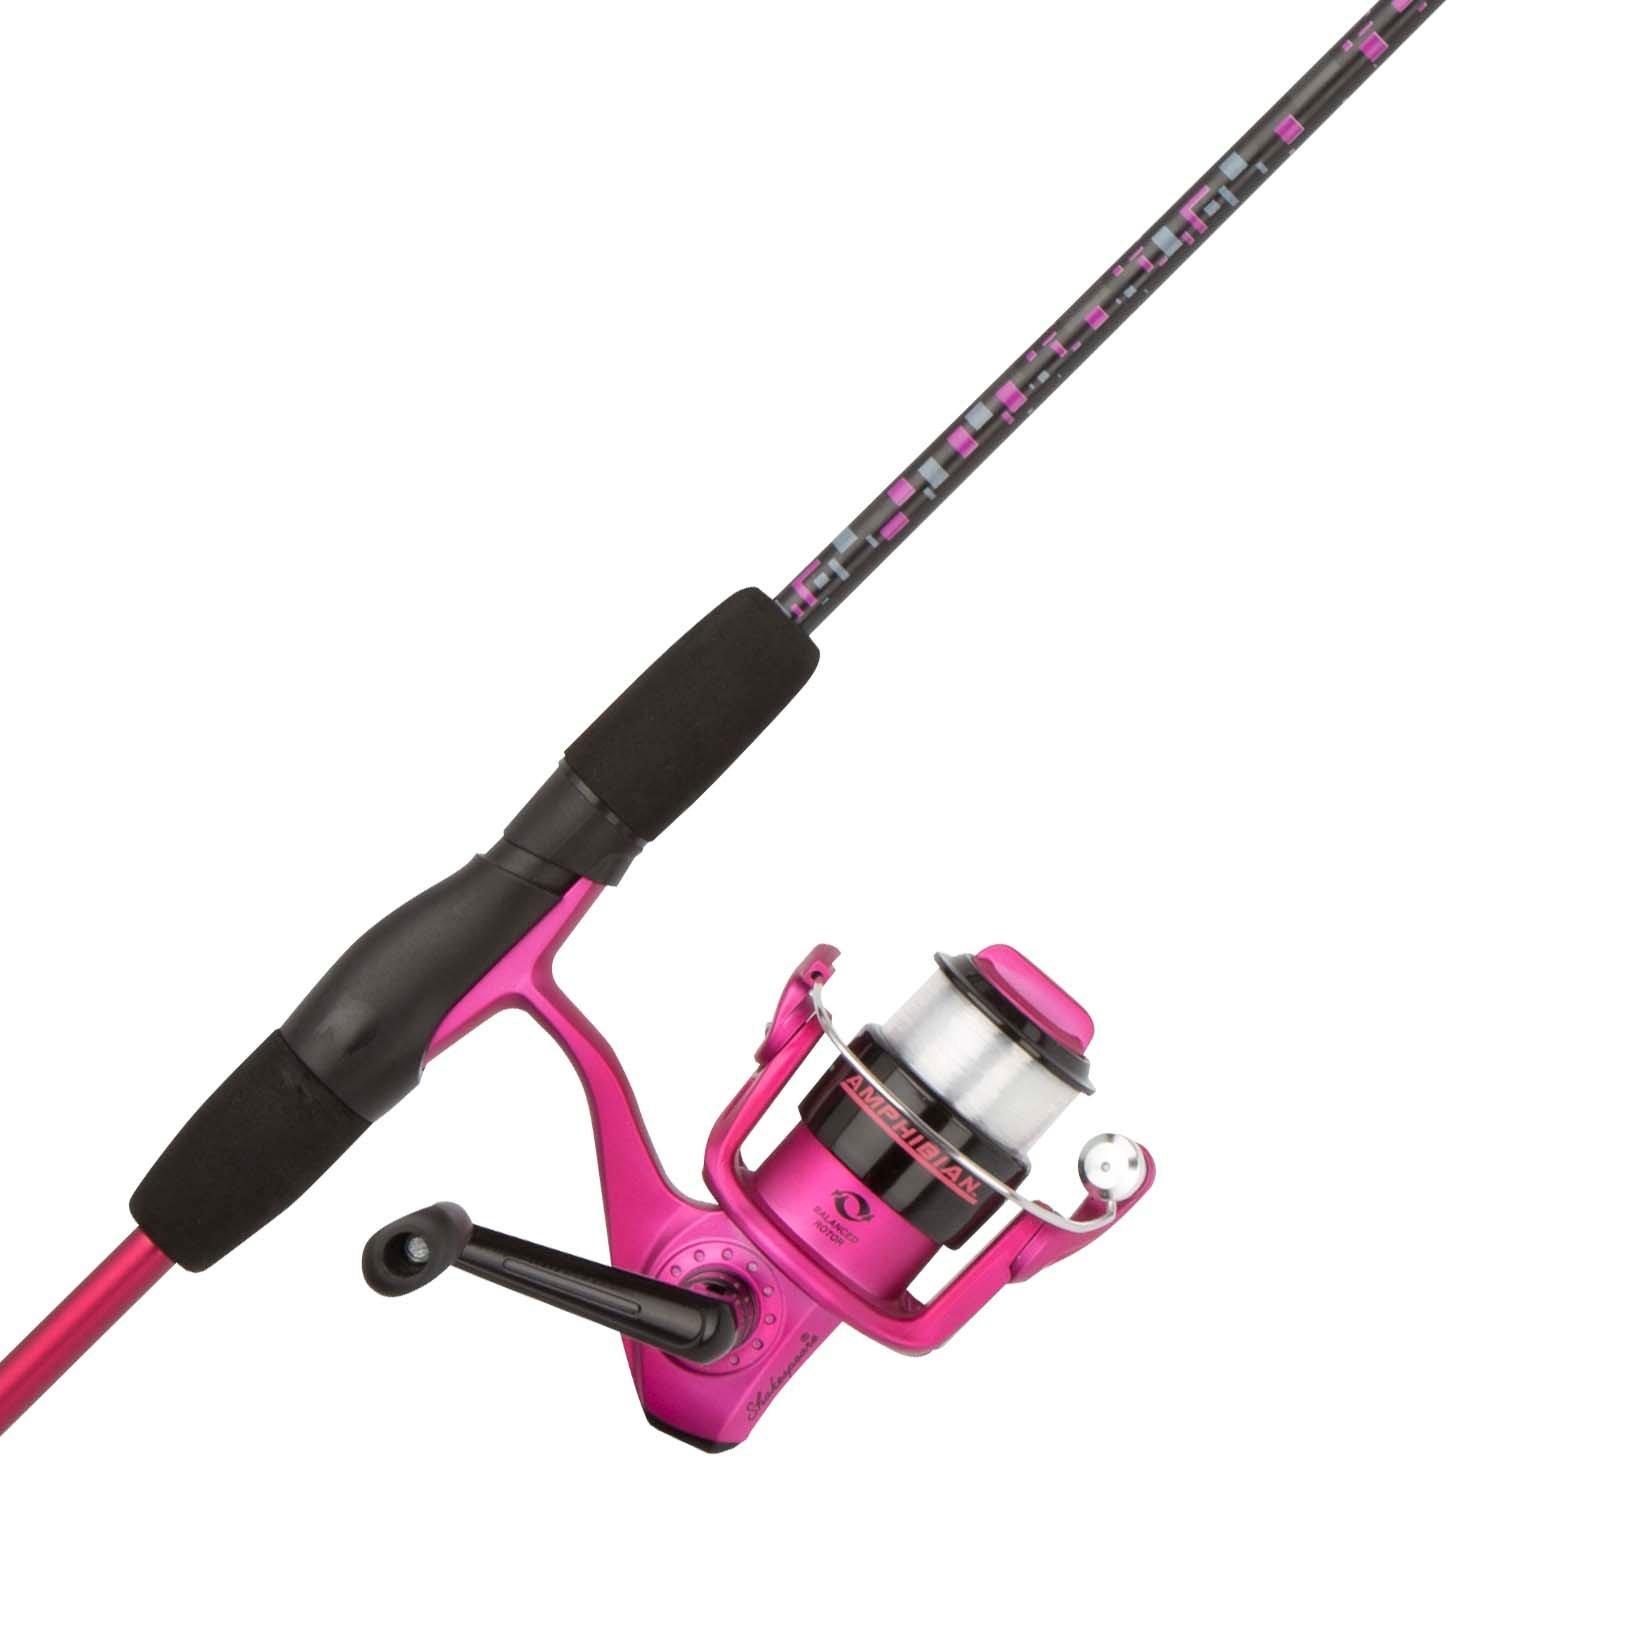 Sea Fishing Fishing Tackle Pen Shape Rod and Gear Fish Reel Bait Casting  Reel Combination Purple r9d246, Surf Fishing Rods -  Canada